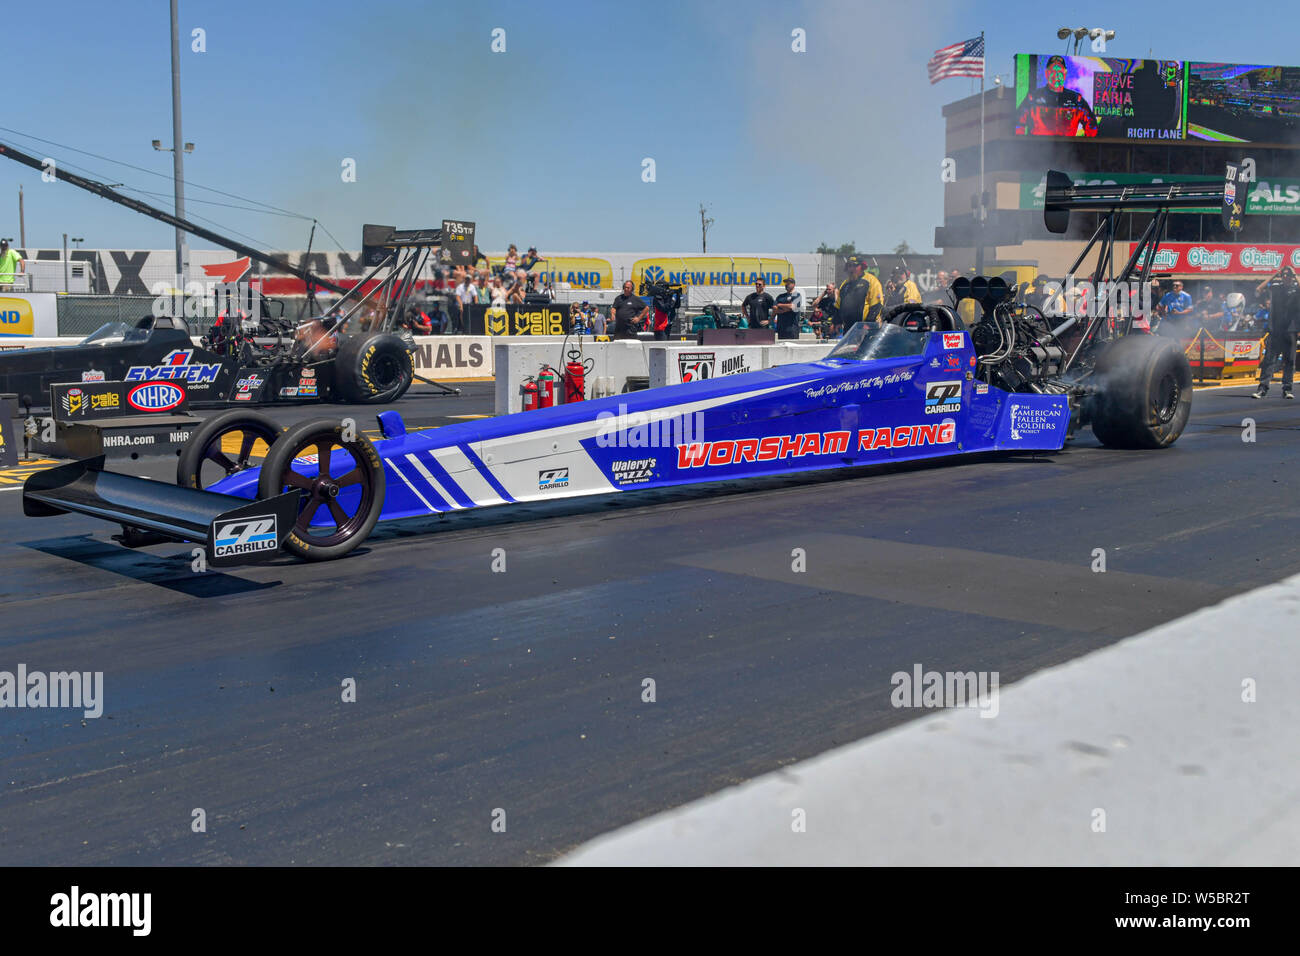 Sonoma, California, USA. 27th July, 2019. Steven Chrisman launches his top fuel dragster during the NHRA Sonoma Nationals at Sonoma Raceway in Sonoma, California. Chris Brown/CSM/Alamy Live News Stock Photo